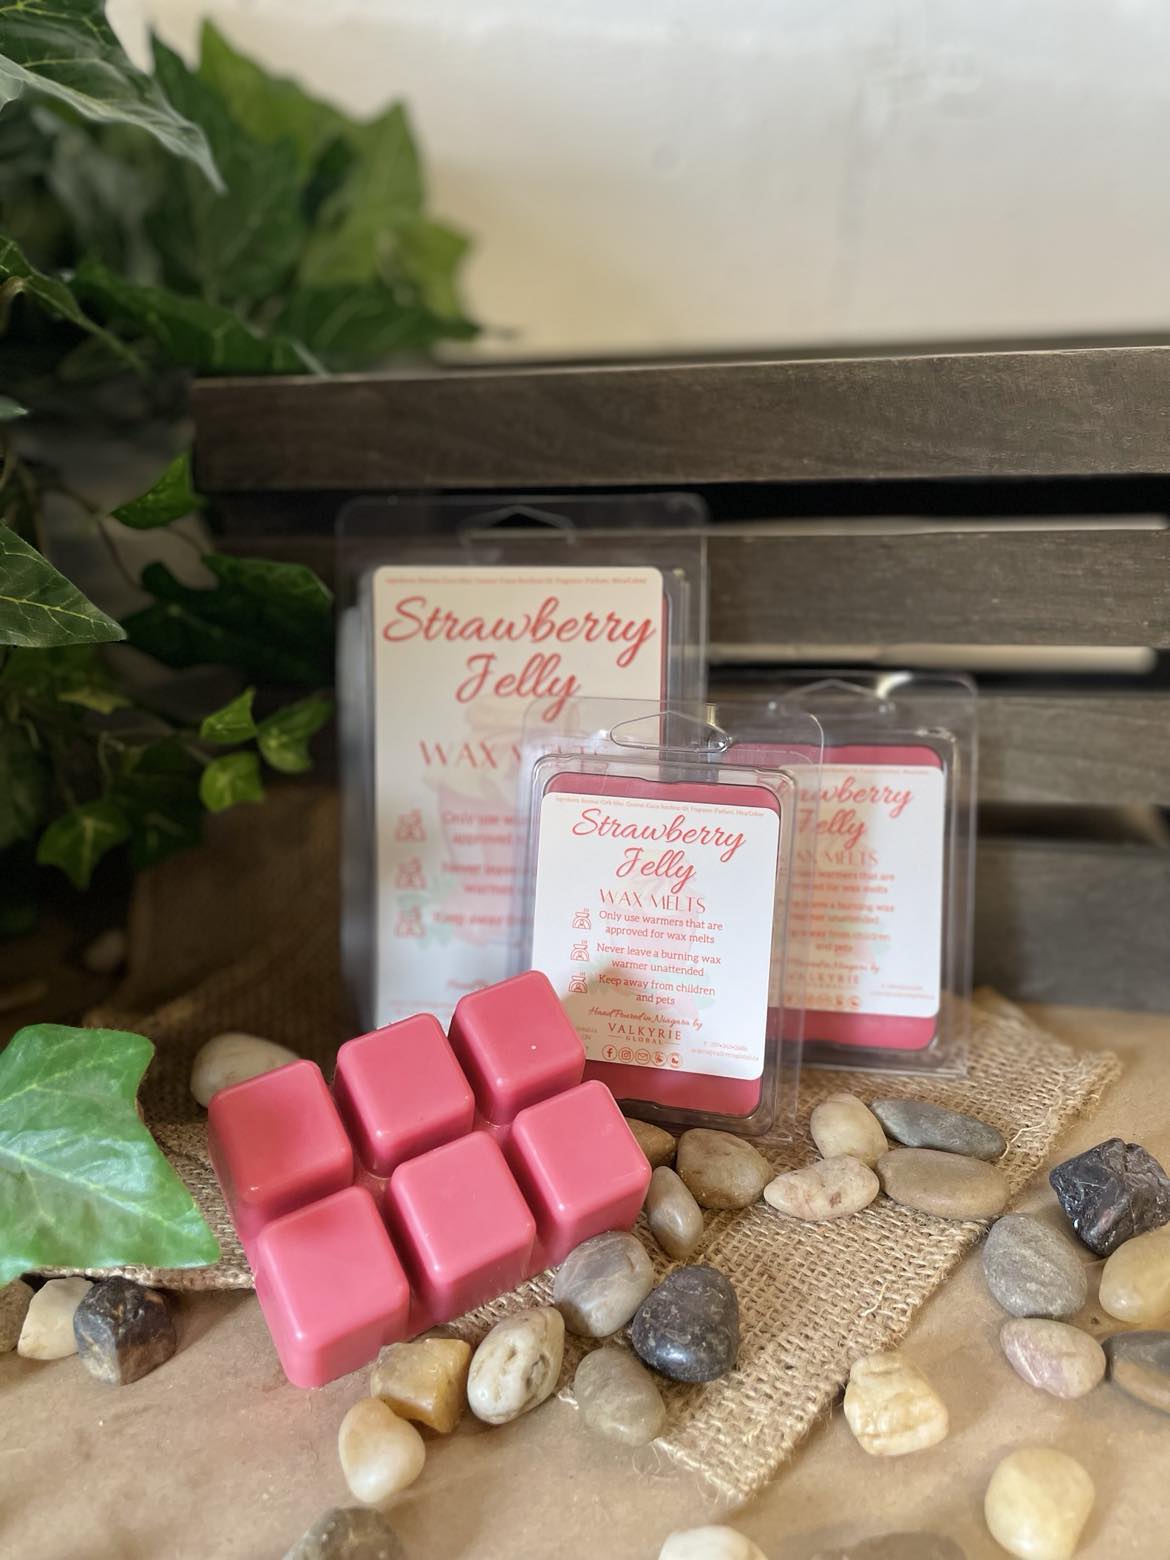 Trying Jelly Wax Melts! 